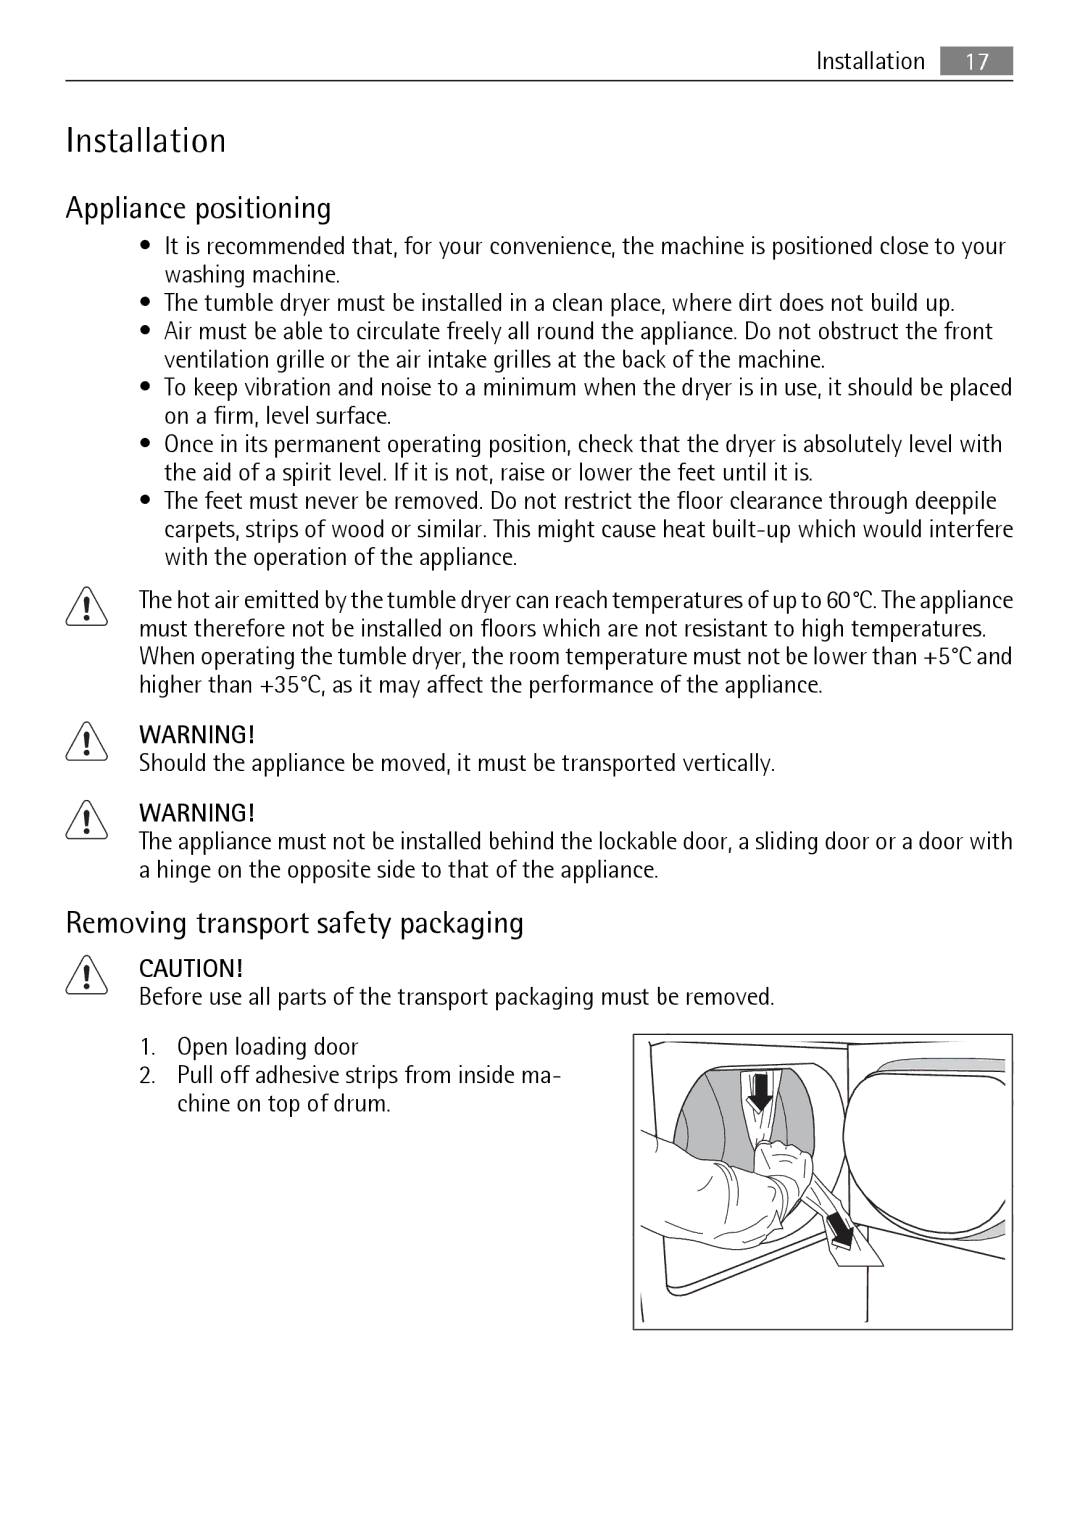 Electrolux T35850 user manual Installation, Appliance positioning, Removing transport safety packaging 